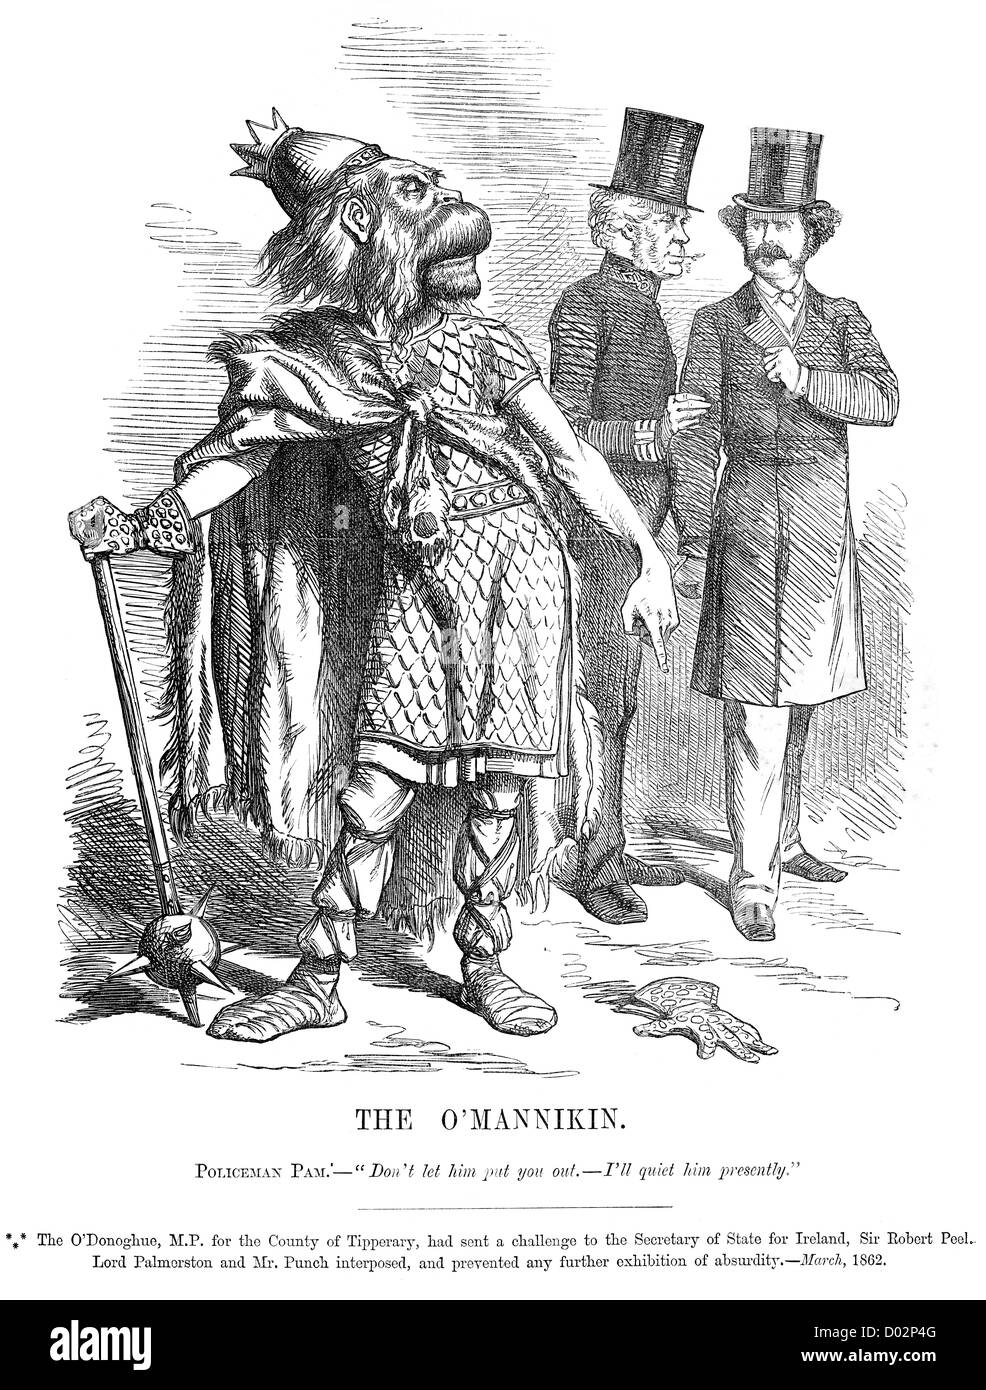 The O'Mannikin. Political cartoon about O'Donoghue MP for Tipperary challenging Sir Robert Peel, March 1862. Stock Photo